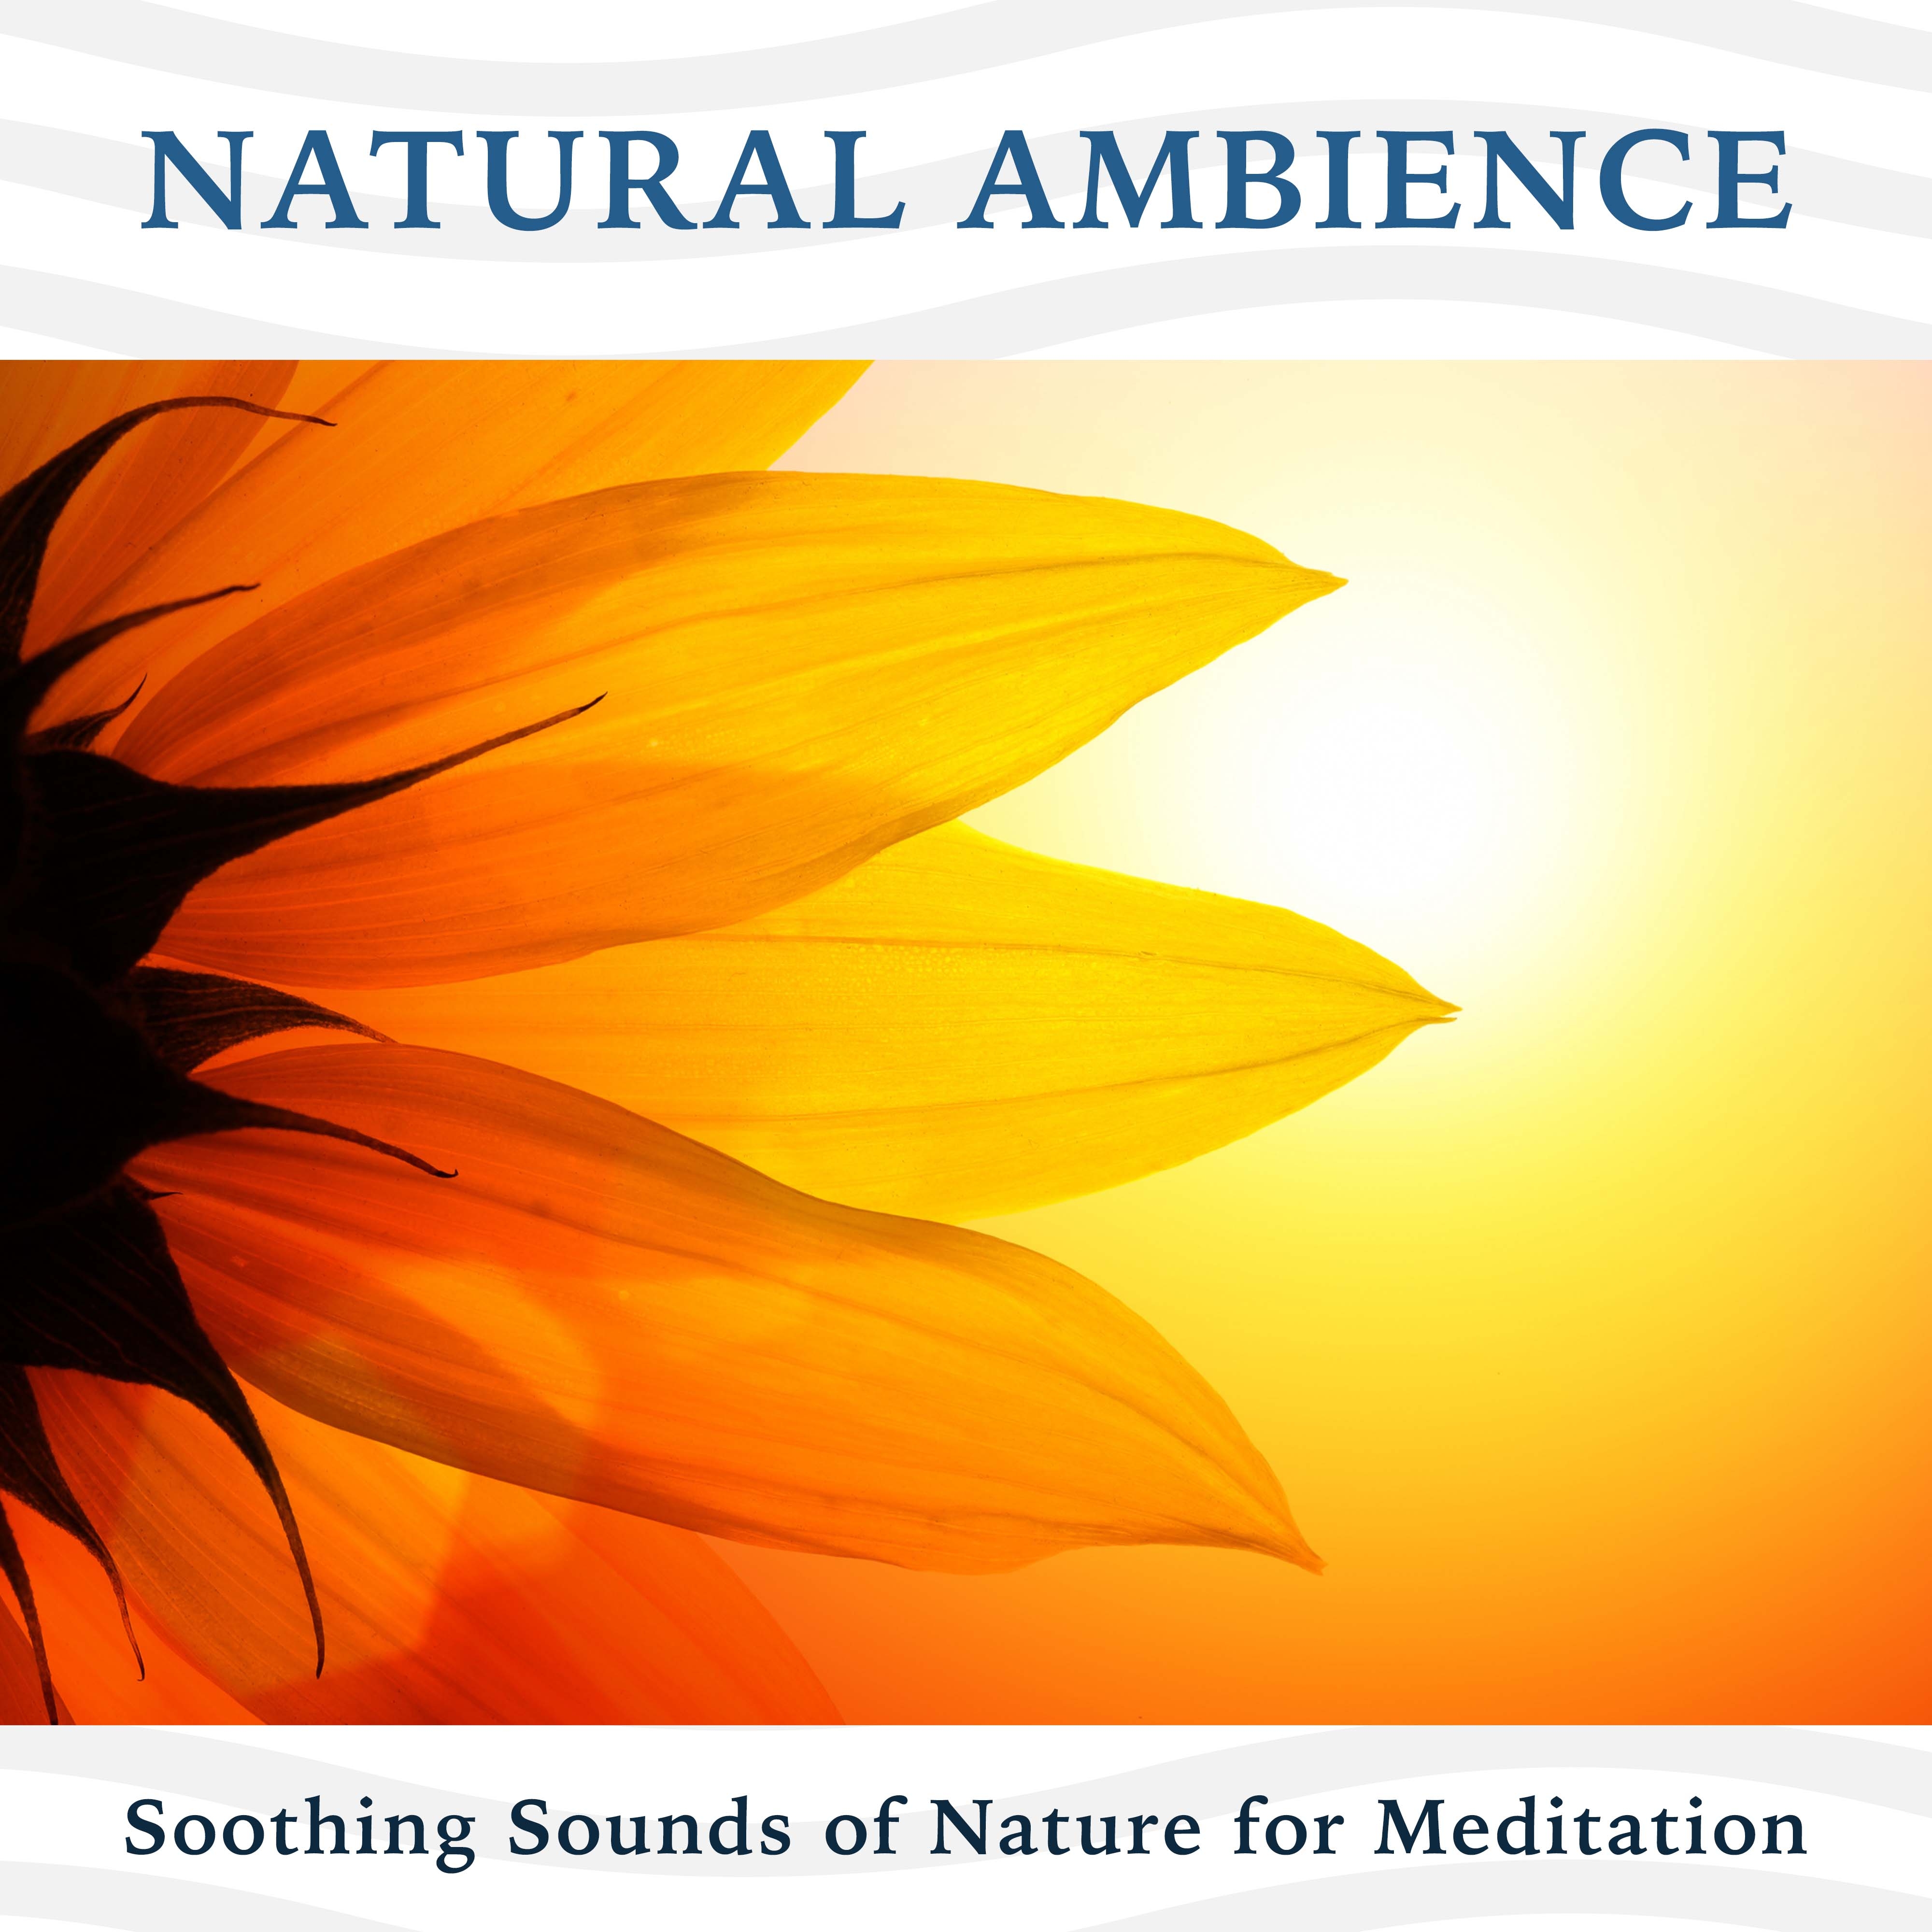 Natural Ambience: Soothing Sounds of Nature for Meditation